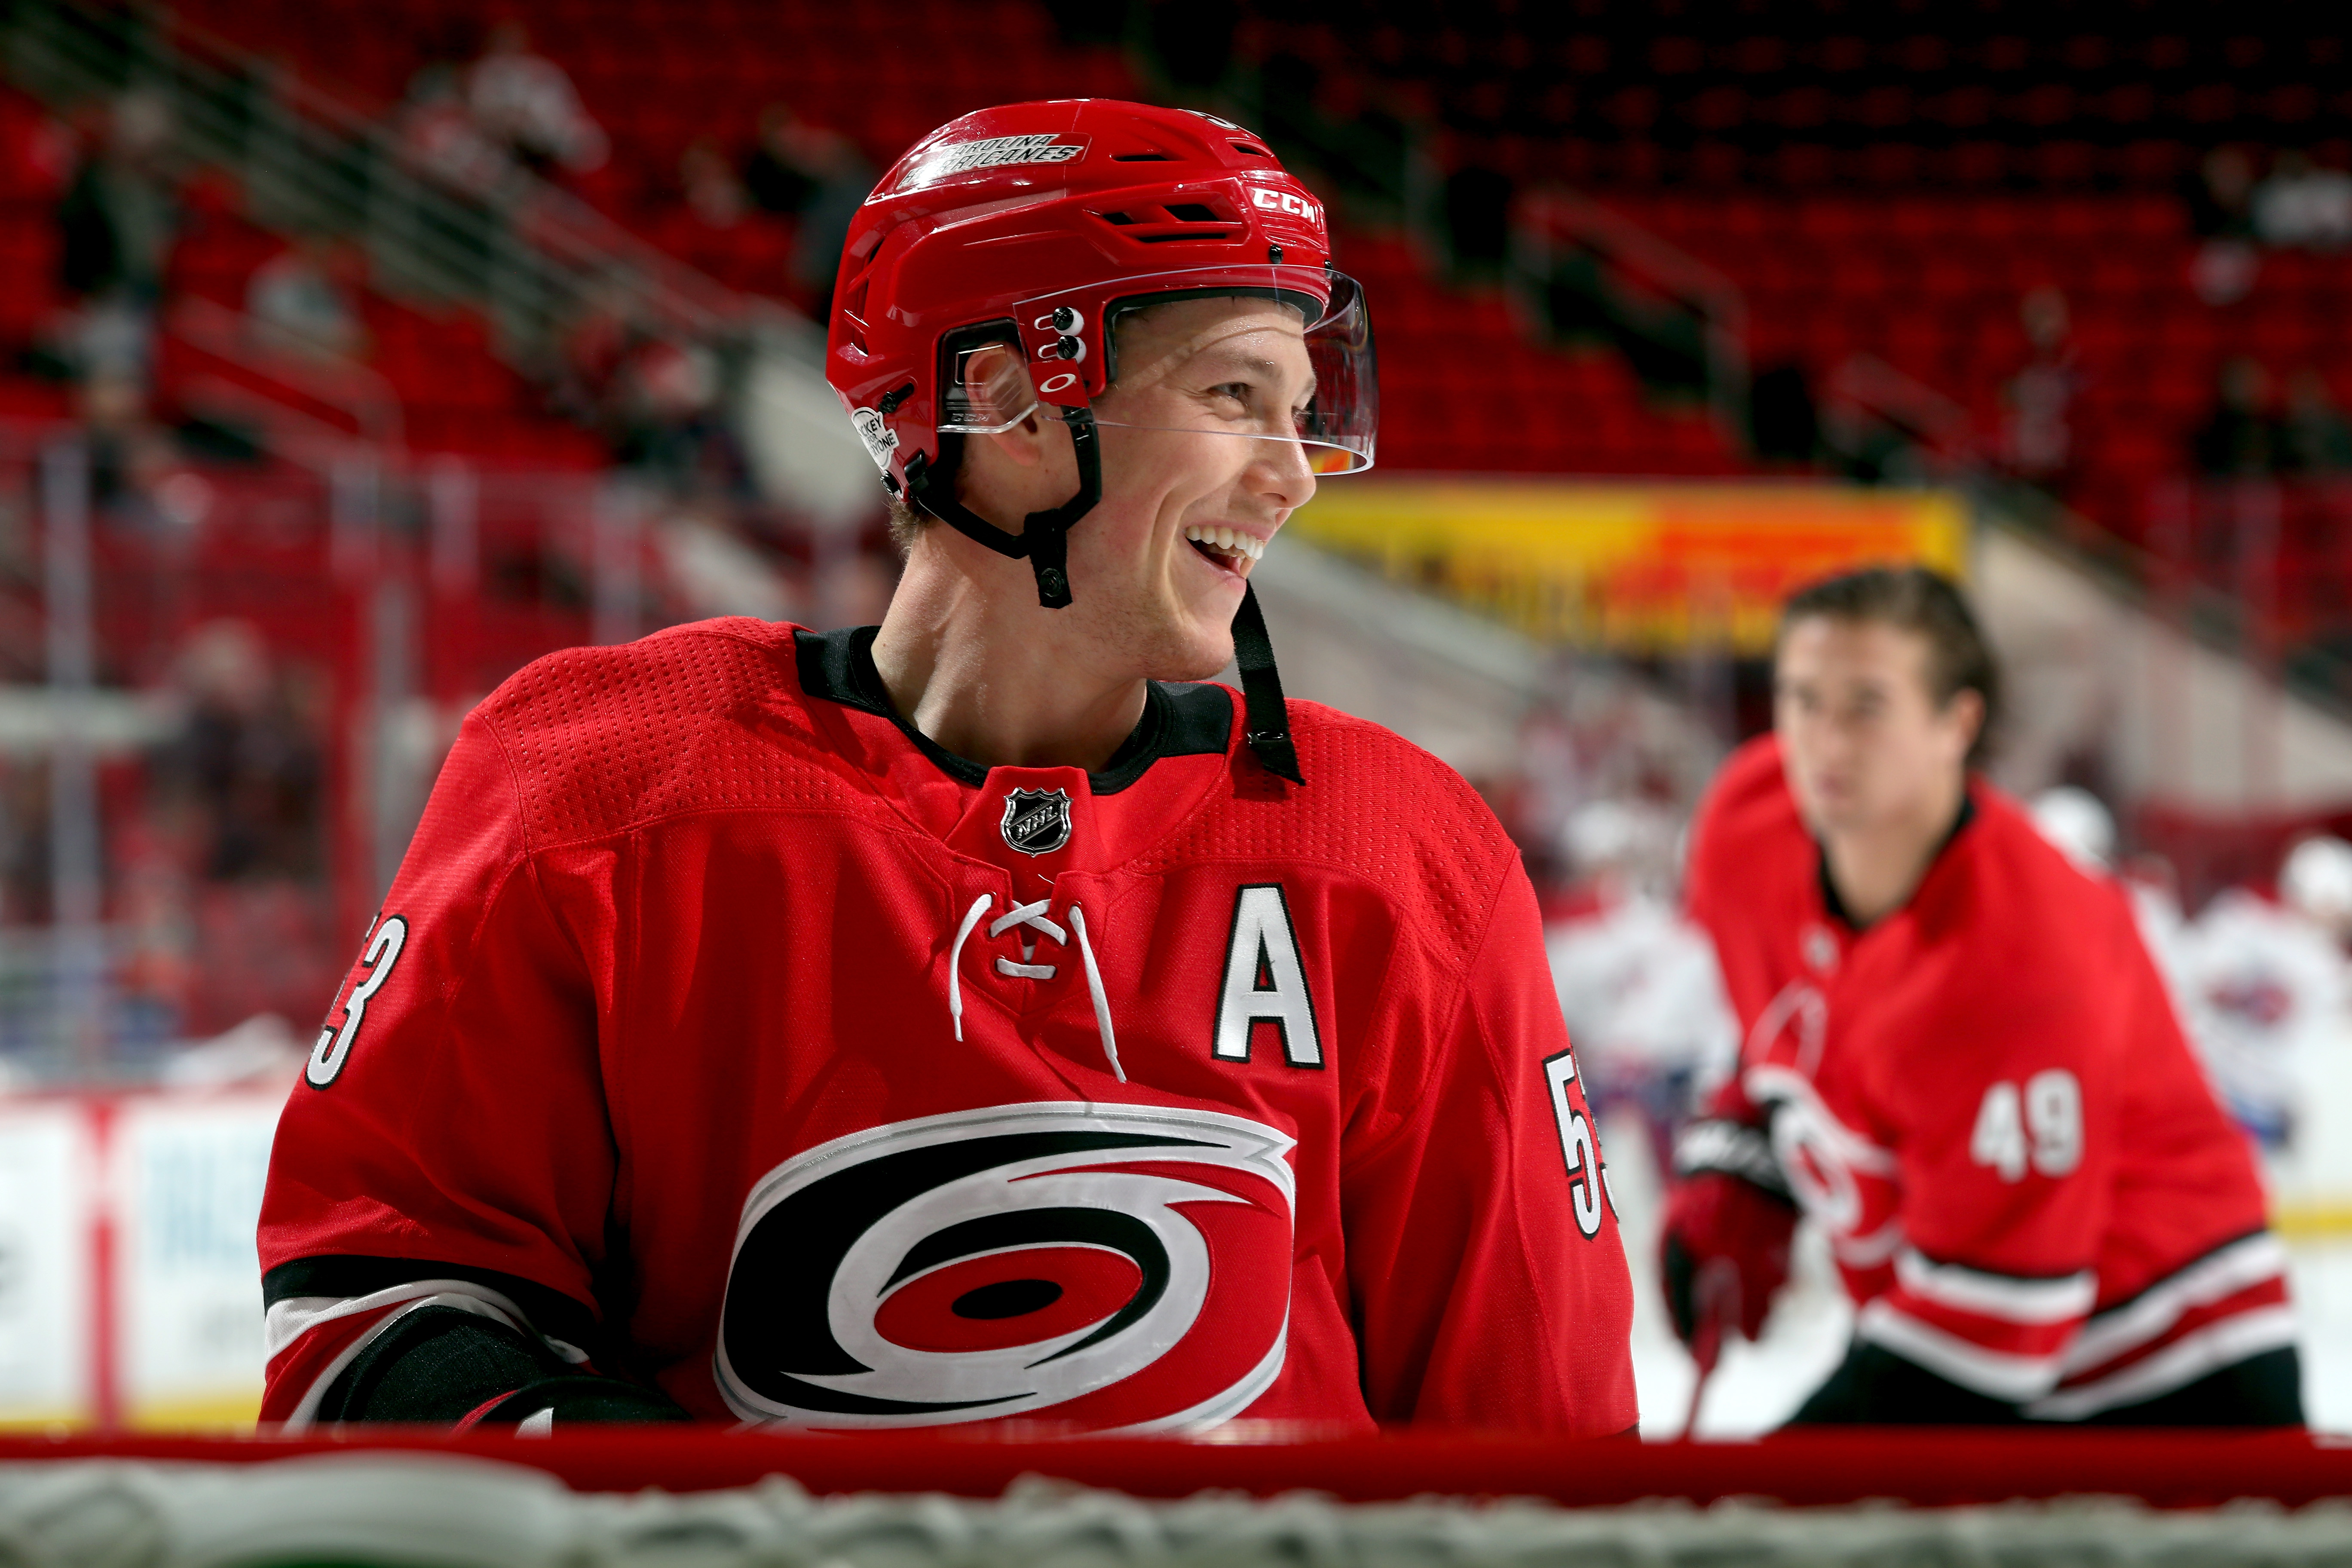 Jeff Skinner, drafted seventh overall with the Carolina Hurricanes